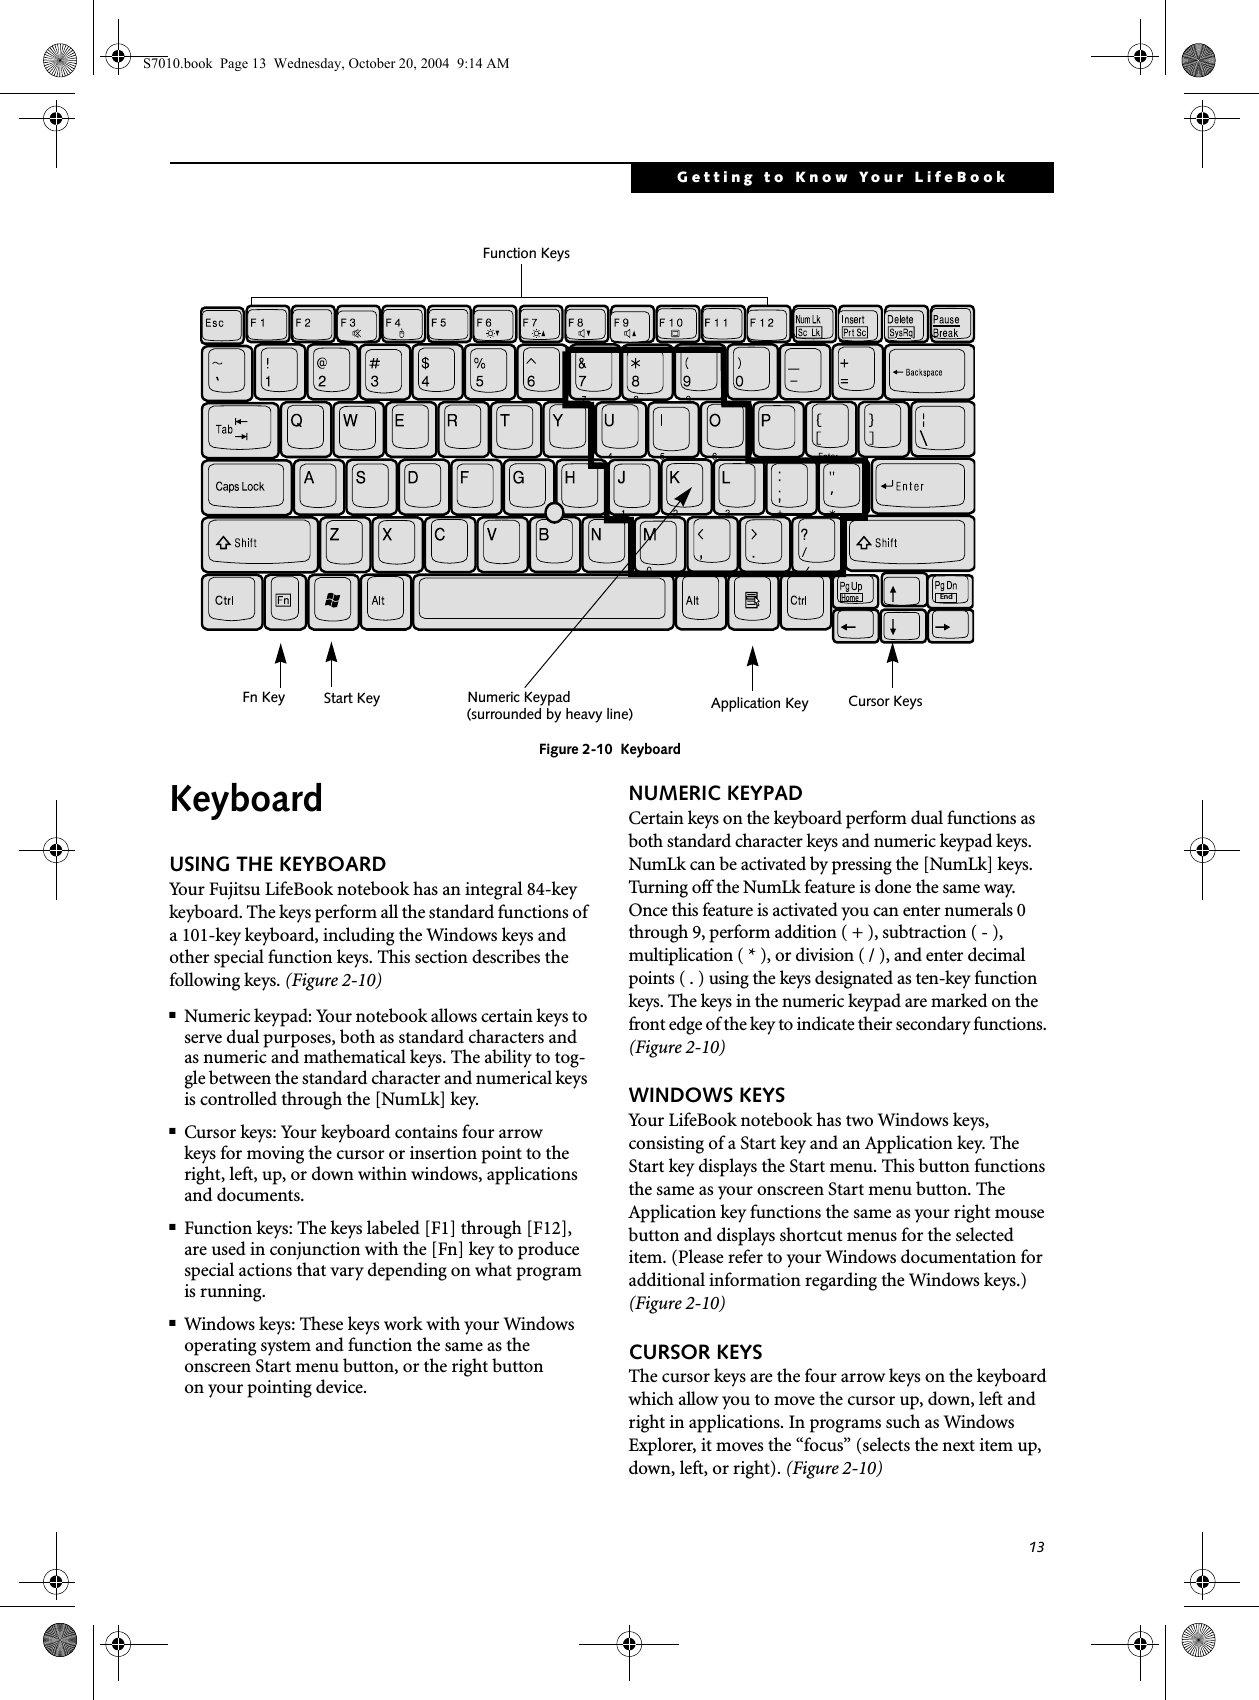 13Getting to Know Your LifeBookFigure 2-10  KeyboardKeyboard USING THE KEYBOARDYour Fujitsu LifeBook notebook has an integral 84-key keyboard. The keys perform all the standard functions of a 101-key keyboard, including the Windows keys and other special function keys. This section describes the following keys. (Figure 2-10)■Numeric keypad: Your notebook allows certain keys to serve dual purposes, both as standard characters and as numeric and mathematical keys. The ability to tog-gle between the standard character and numerical keys is controlled through the [NumLk] key.■Cursor keys: Your keyboard contains four arrowkeys for moving the cursor or insertion point to the right, left, up, or down within windows, applications and documents. ■Function keys: The keys labeled [F1] through [F12], are used in conjunction with the [Fn] key to produce special actions that vary depending on what program is running. ■Windows keys: These keys work with your Windows operating system and function the same as the onscreen Start menu button, or the right buttonon your pointing device.NUMERIC KEYPADCertain keys on the keyboard perform dual functions as both standard character keys and numeric keypad keys. NumLk can be activated by pressing the [NumLk] keys. Turning off the NumLk feature is done the same way. Once this feature is activated you can enter numerals 0 through 9, perform addition ( + ), subtraction ( - ),multiplication ( * ), or division ( / ), and enter decimal points ( . ) using the keys designated as ten-key function keys. The keys in the numeric keypad are marked on the front edge of the key to indicate their secondary functions. (Figure 2-10) WINDOWS KEYSYour LifeBook notebook has two Windows keys, consisting of a Start key and an Application key. The Start key displays the Start menu. This button functions the same as your onscreen Start menu button. The Application key functions the same as your right mouse button and displays shortcut menus for the selected item. (Please refer to your Windows documentation for additional information regarding the Windows keys.) (Figure 2-10)CURSOR KEYSThe cursor keys are the four arrow keys on the keyboard which allow you to move the cursor up, down, left and right in applications. In programs such as Windows Explorer, it moves the “focus” (selects the next item up, down, left, or right). (Figure 2-10)EndHomeFn Key Start KeyFunction KeysNumeric Keypad Application Key Cursor Keys(surrounded by heavy line) S7010.book  Page 13  Wednesday, October 20, 2004  9:14 AM